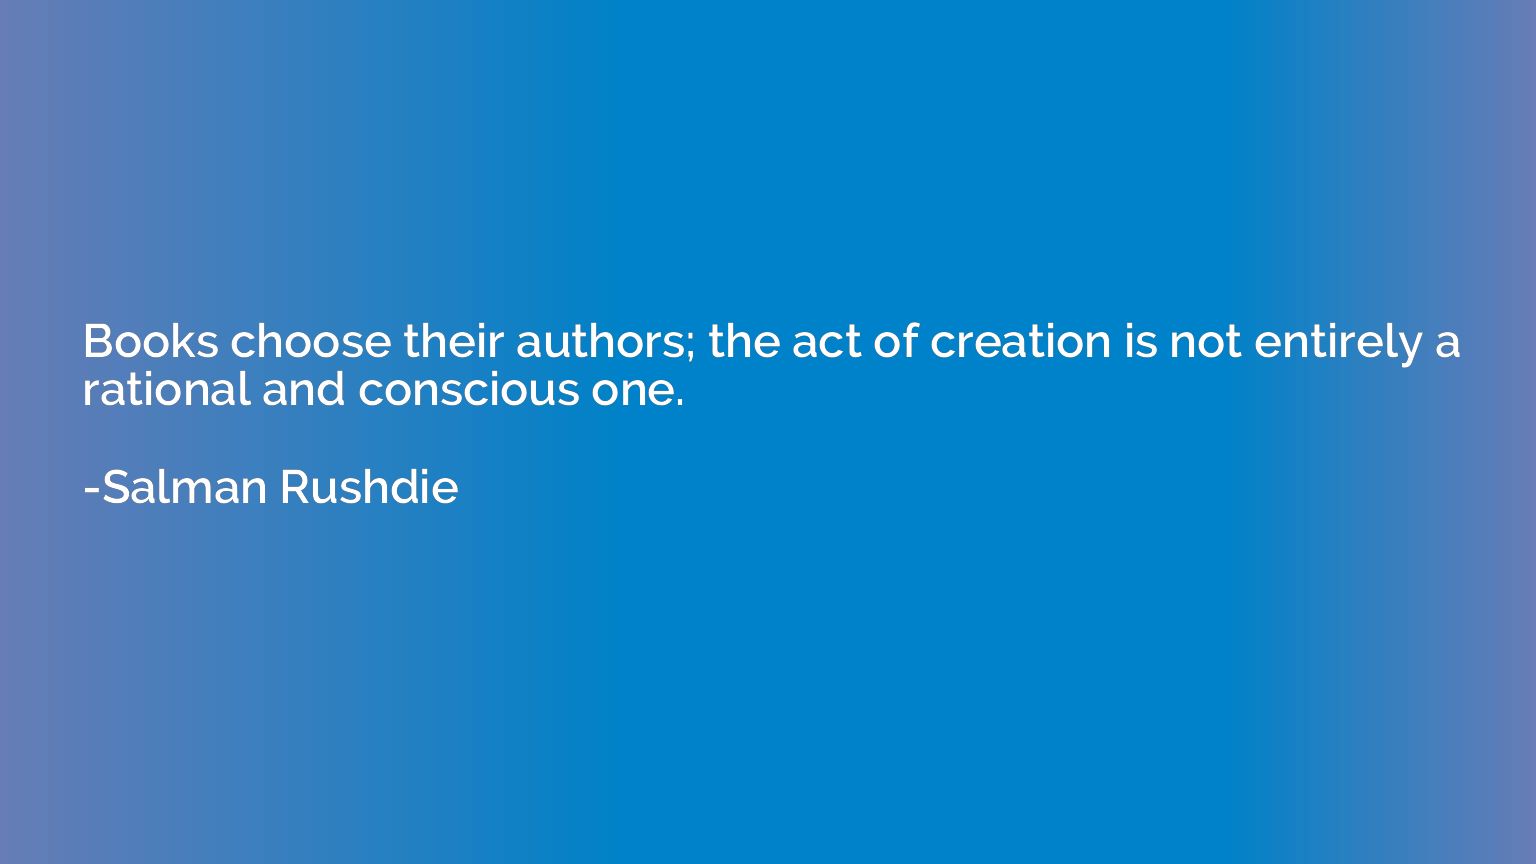 Books choose their authors; the act of creation is not entir